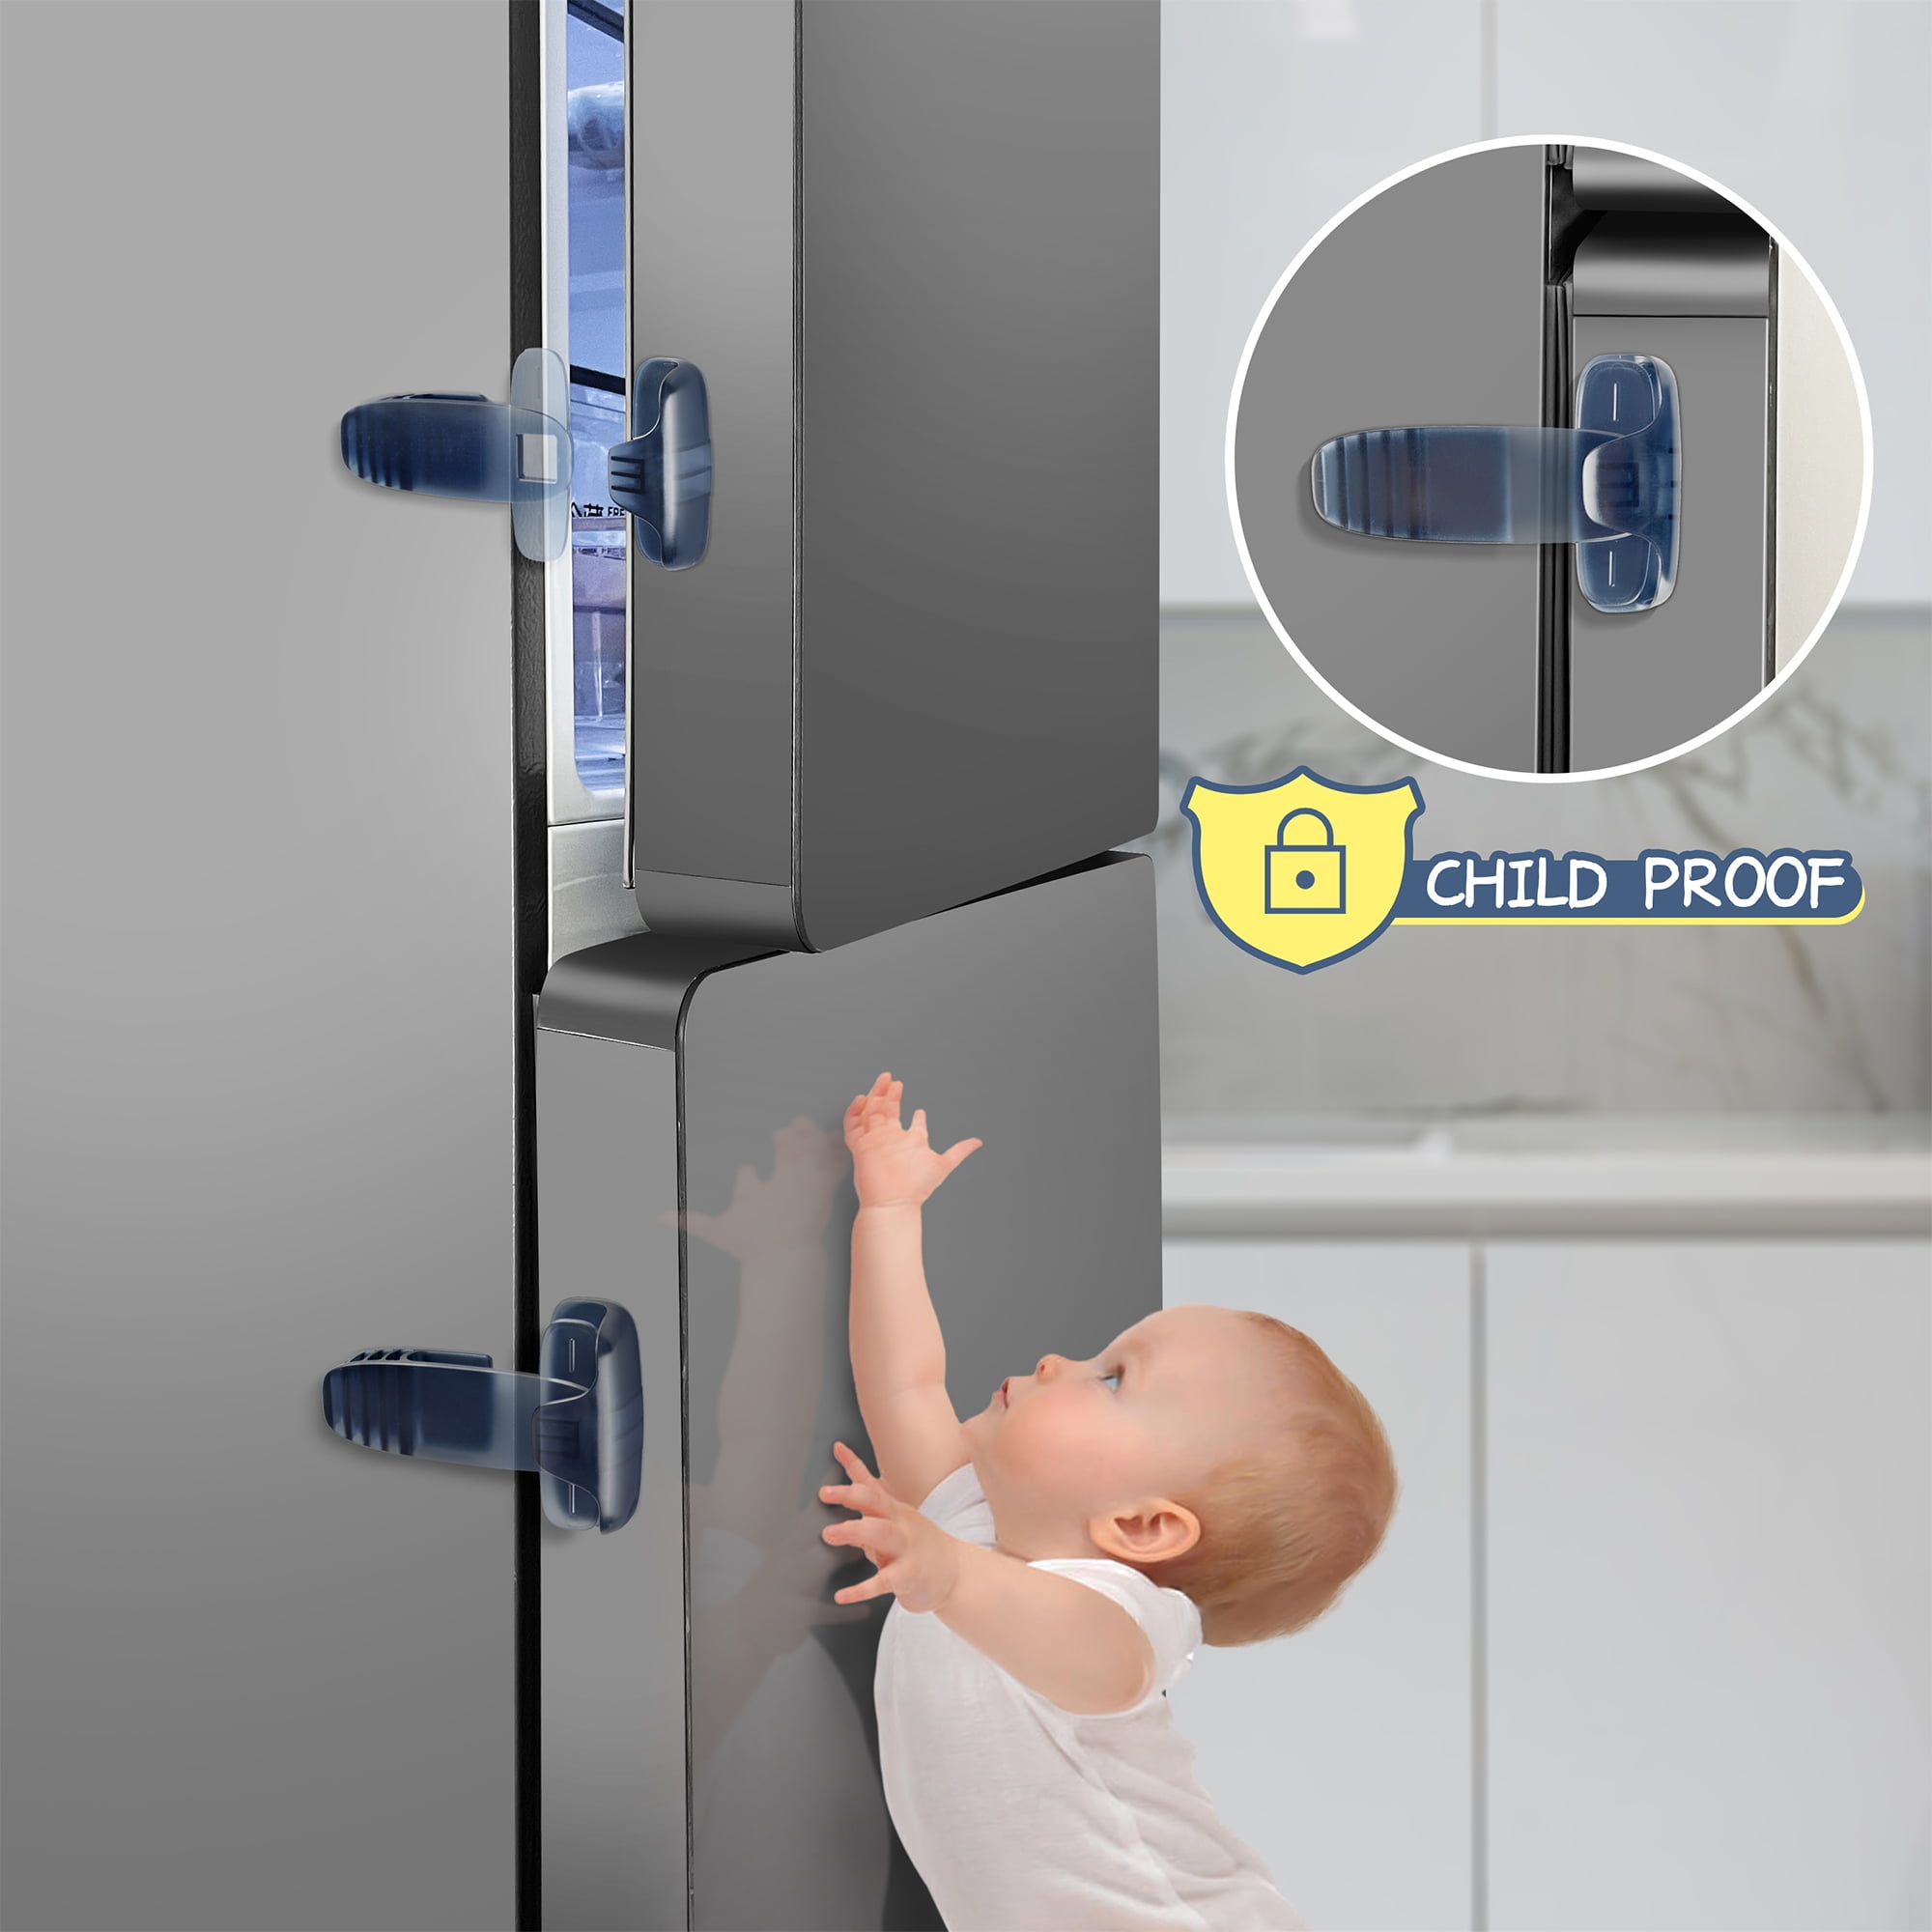 Cabinet Locks Child Safety Adjustable Length Strap and Latch Lock Premium 3M Adhesive 6 Pack Baby Proofing Reusable with Included Kit - Child Proof Refrigerator Fridge Doors and Cabinets 